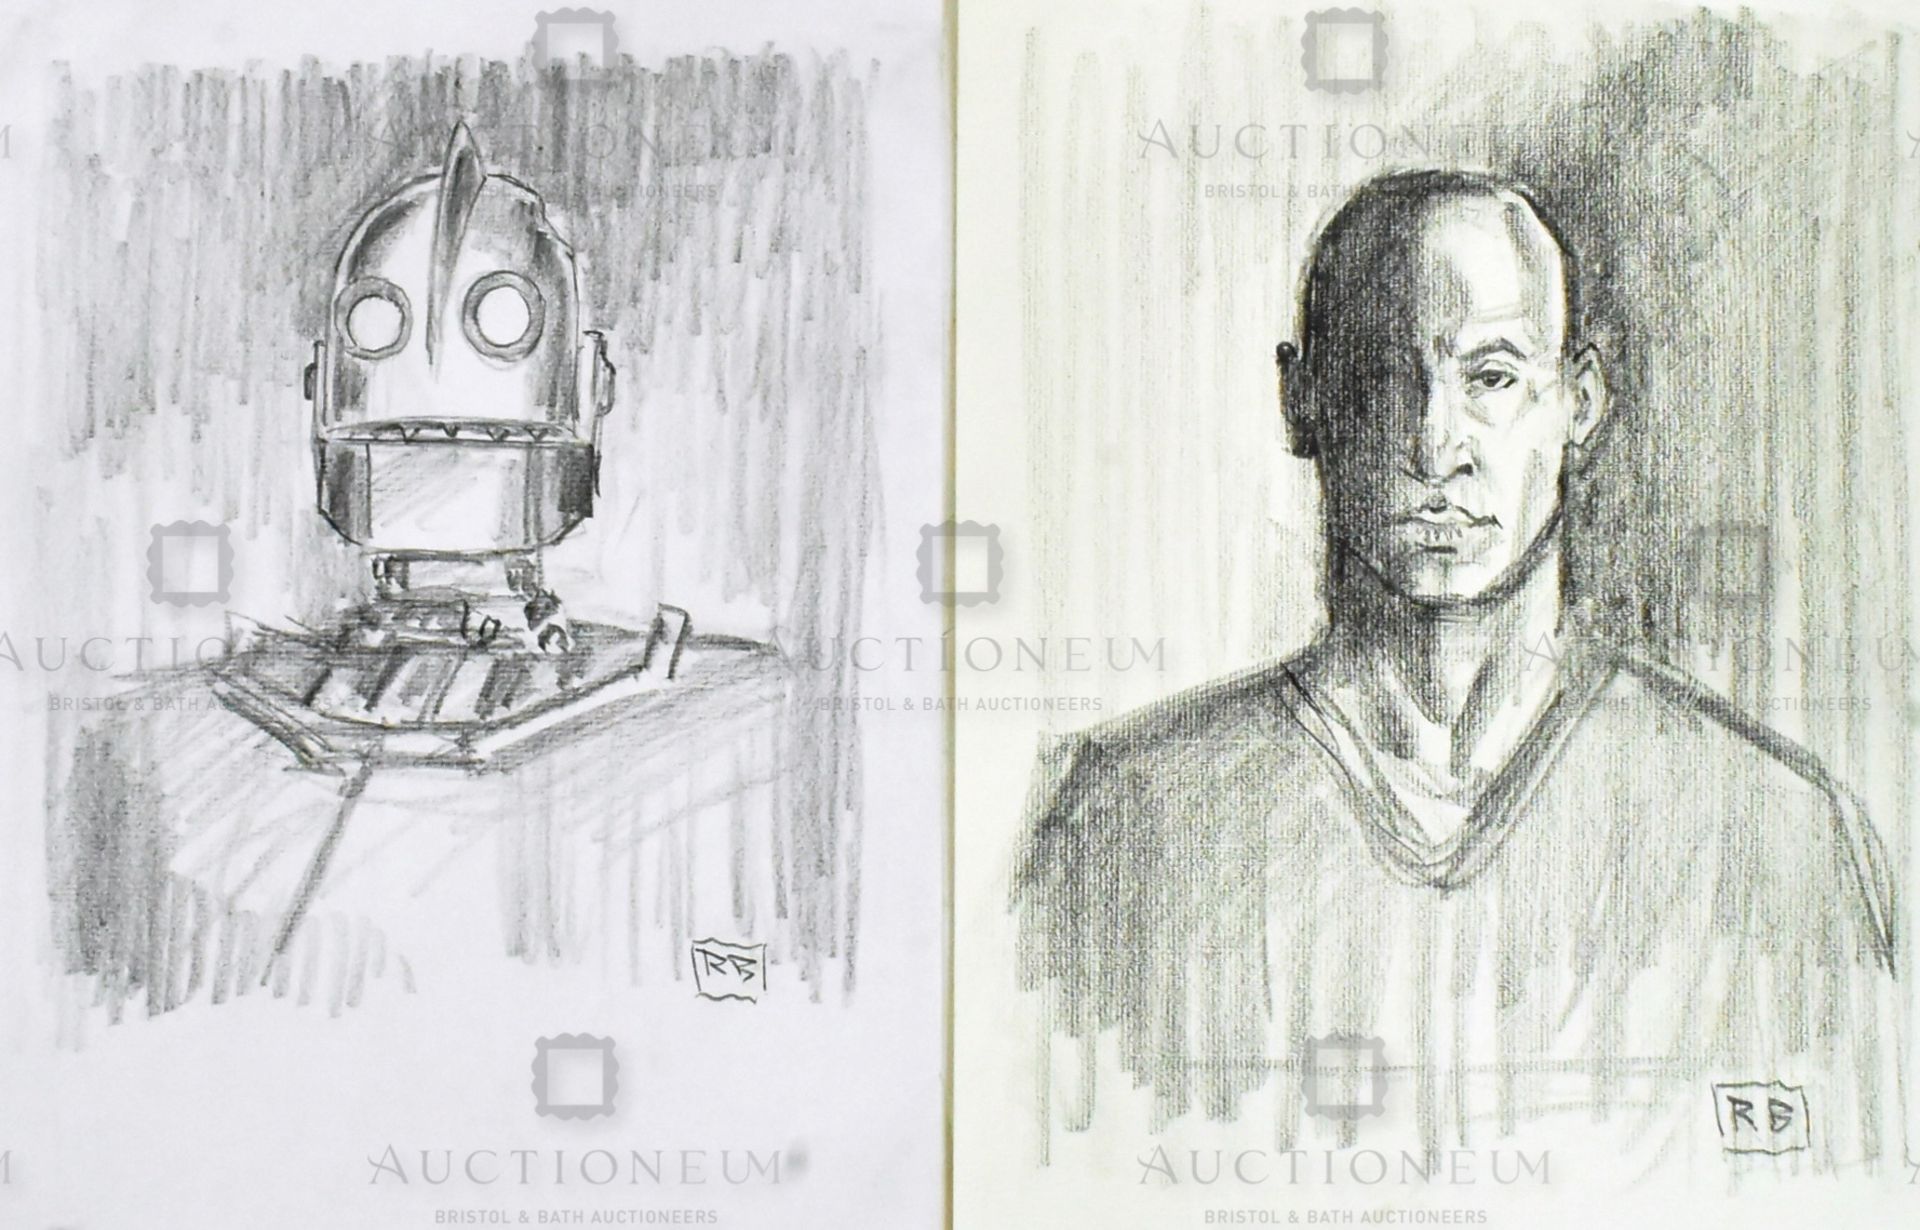 THE IRON GIANT - DRAWINGS BY RICHARD BAZLEY